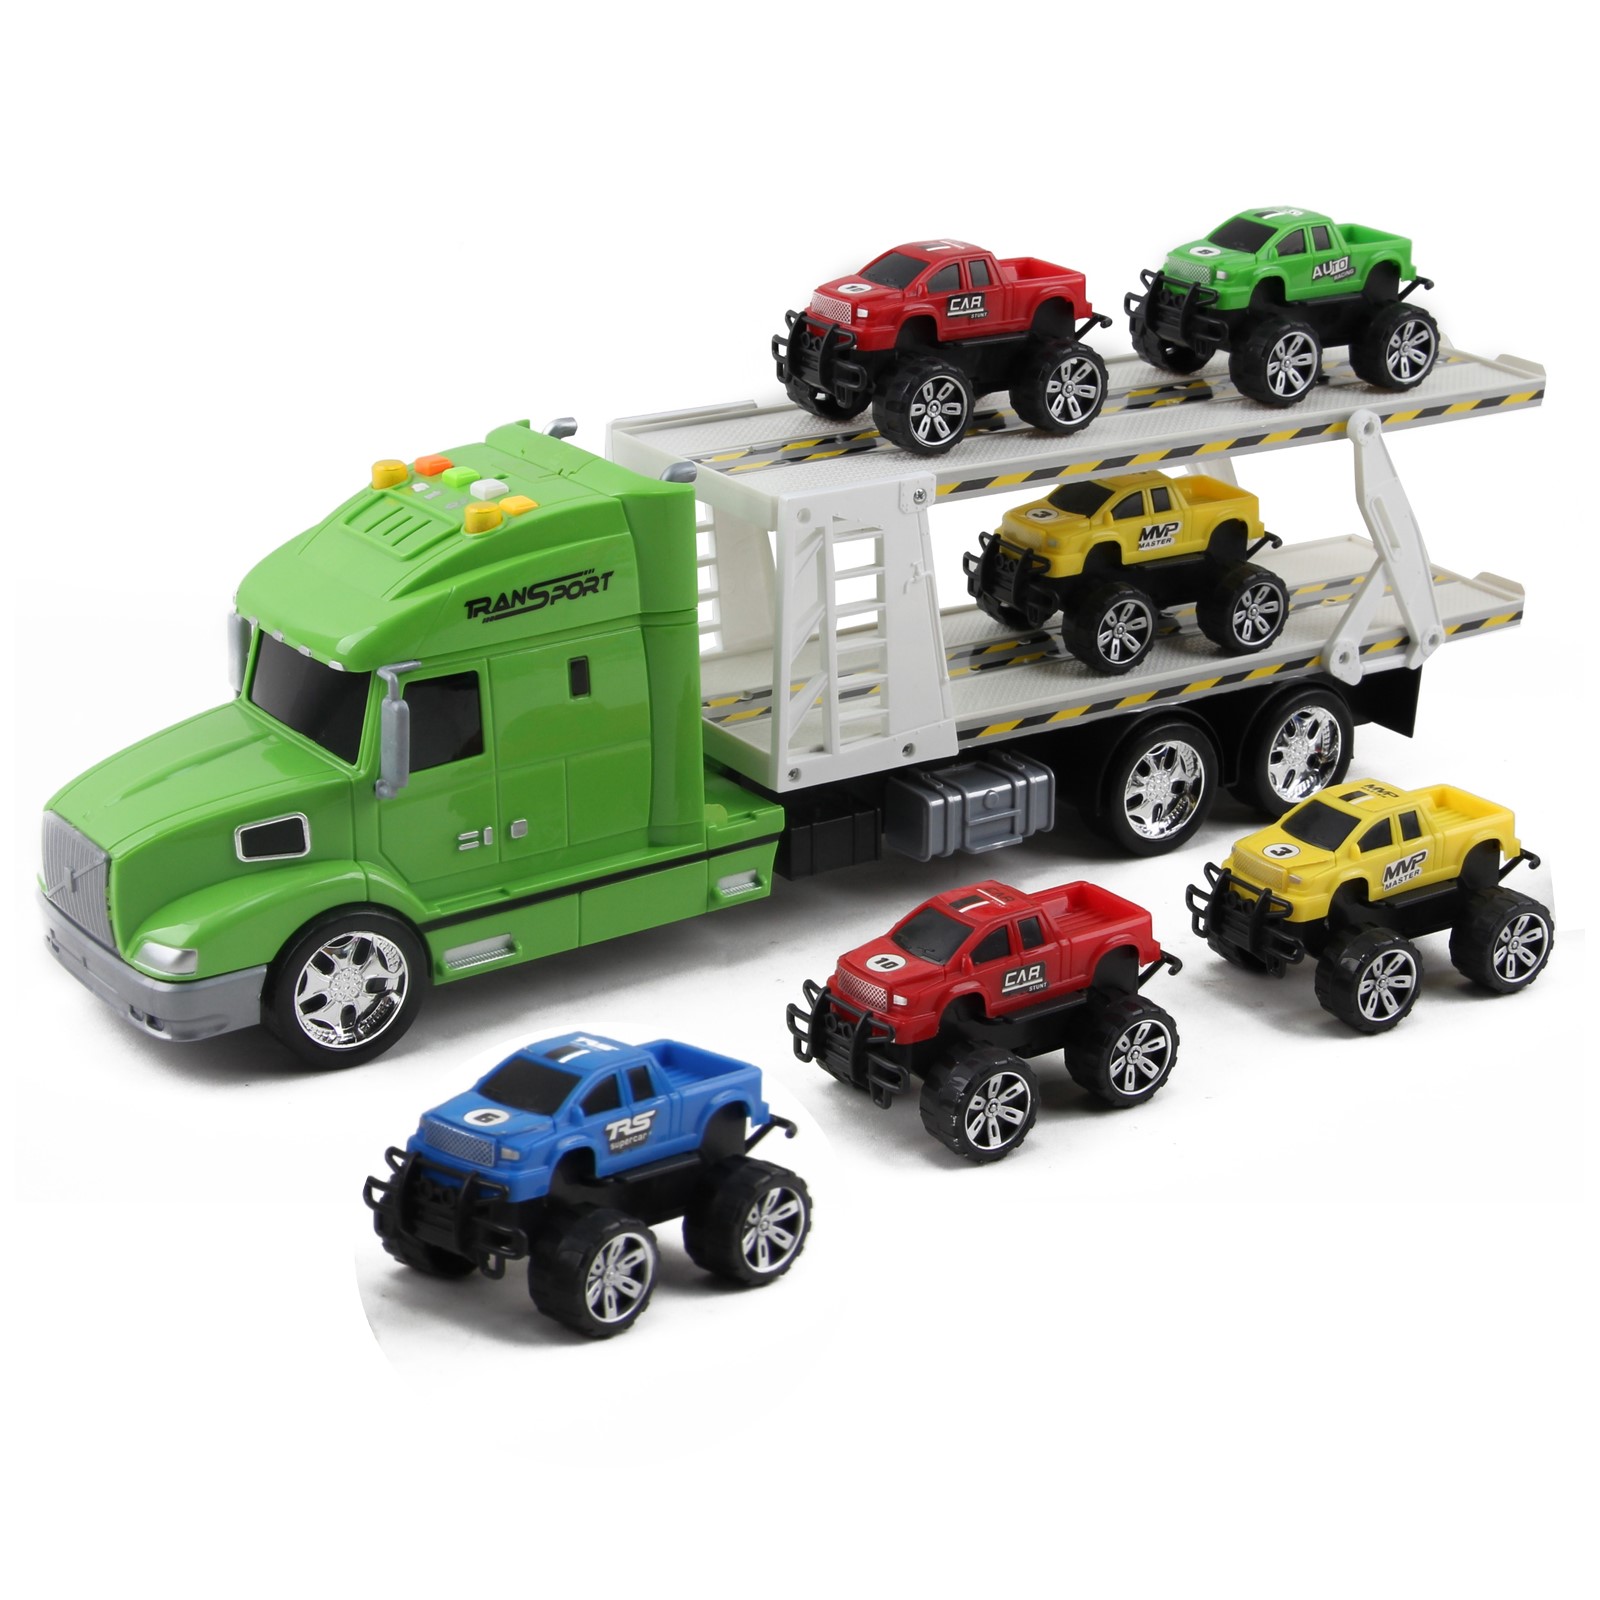 Friction Powered Toy Semi Truck Trailer Kids Push And Go Big Rig Carrier Includes Six Pickup Cars 1:20 Scale Auto Transporter Vehicle Perfect Pretend Play Imagination Gift For Children